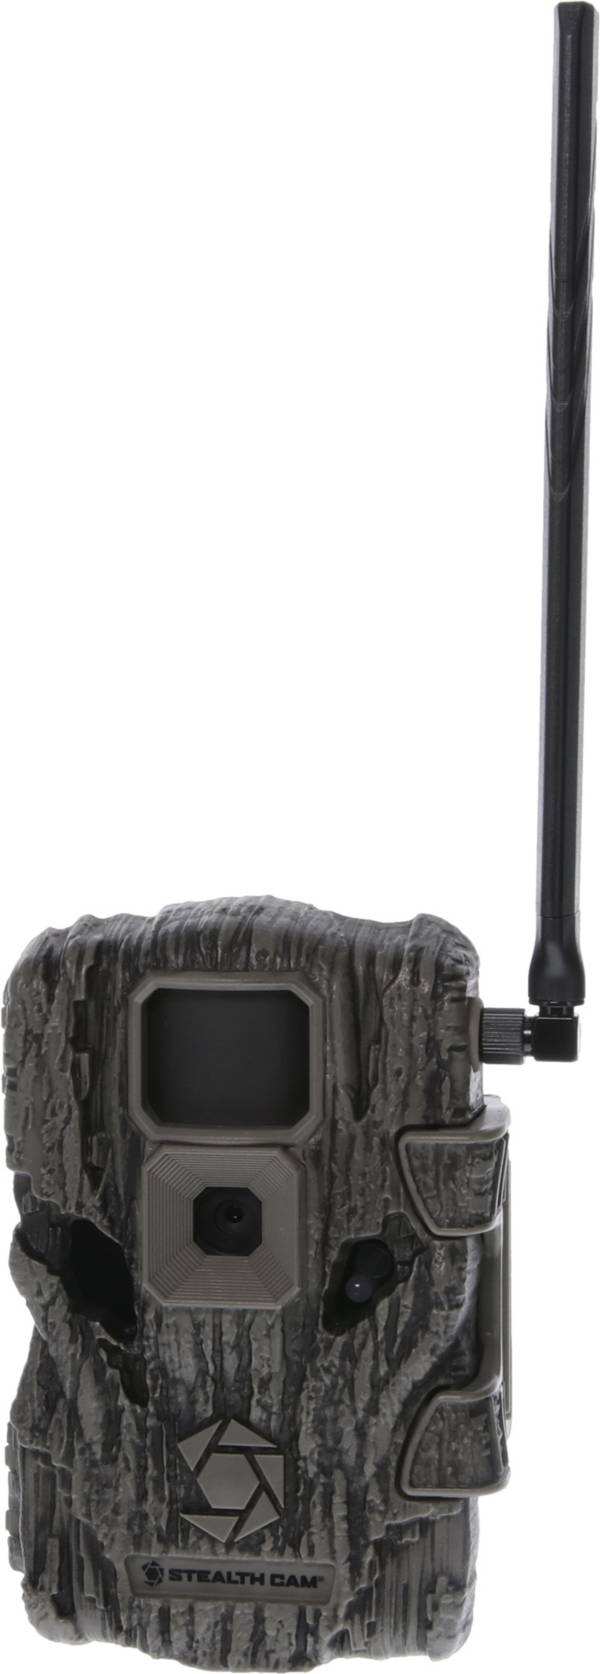 Stealth Cam Fusion X V26 Cellular Camera - 26MP product image